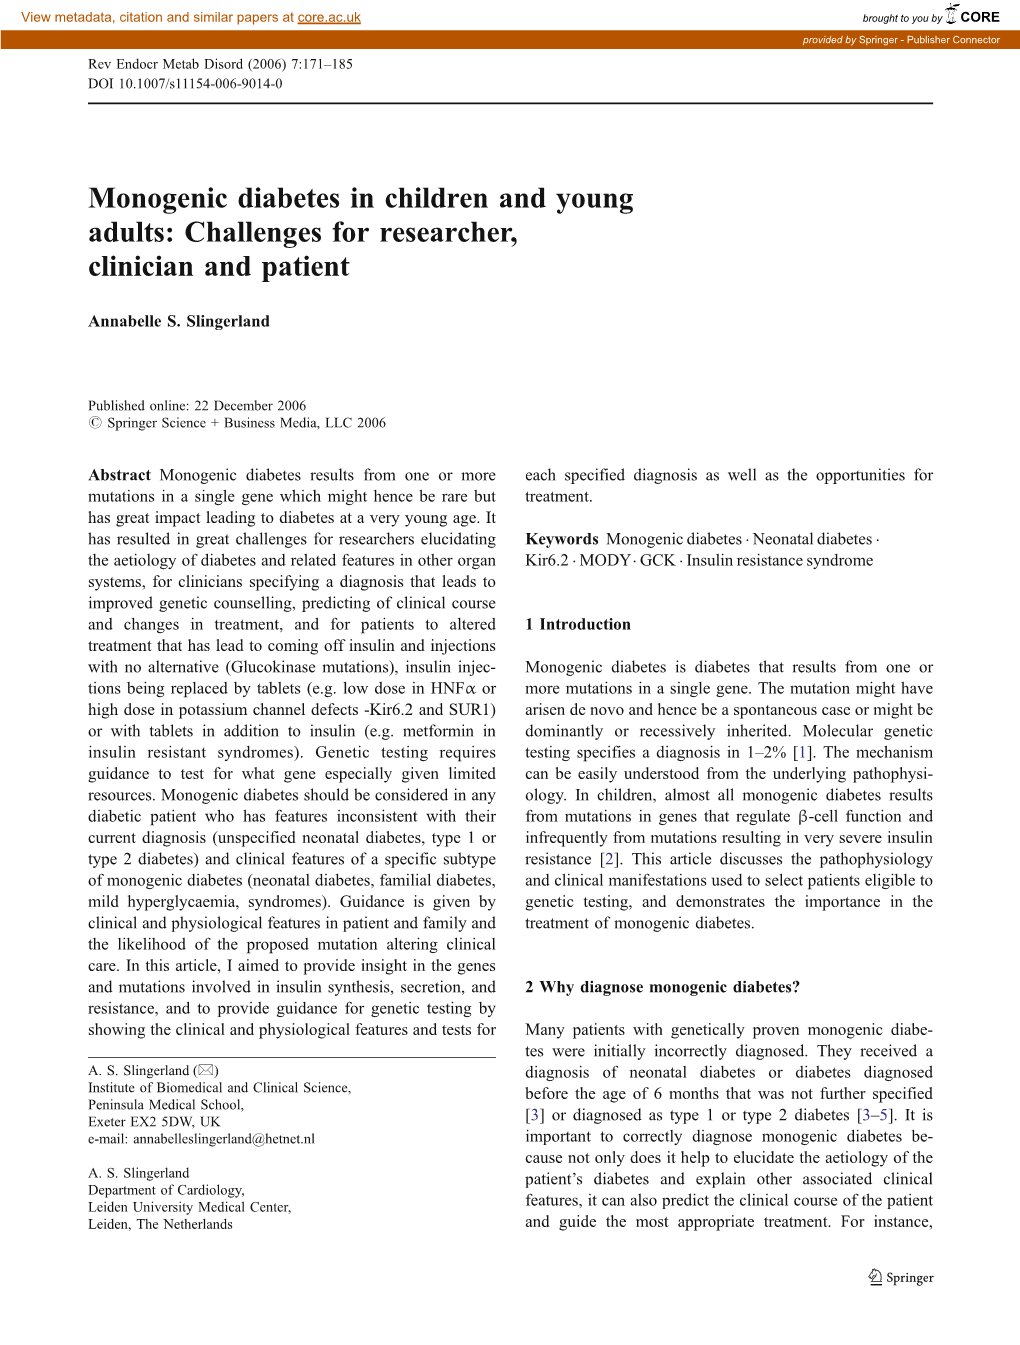 Monogenic Diabetes in Children and Young Adults: Challenges for Researcher, Clinician and Patient